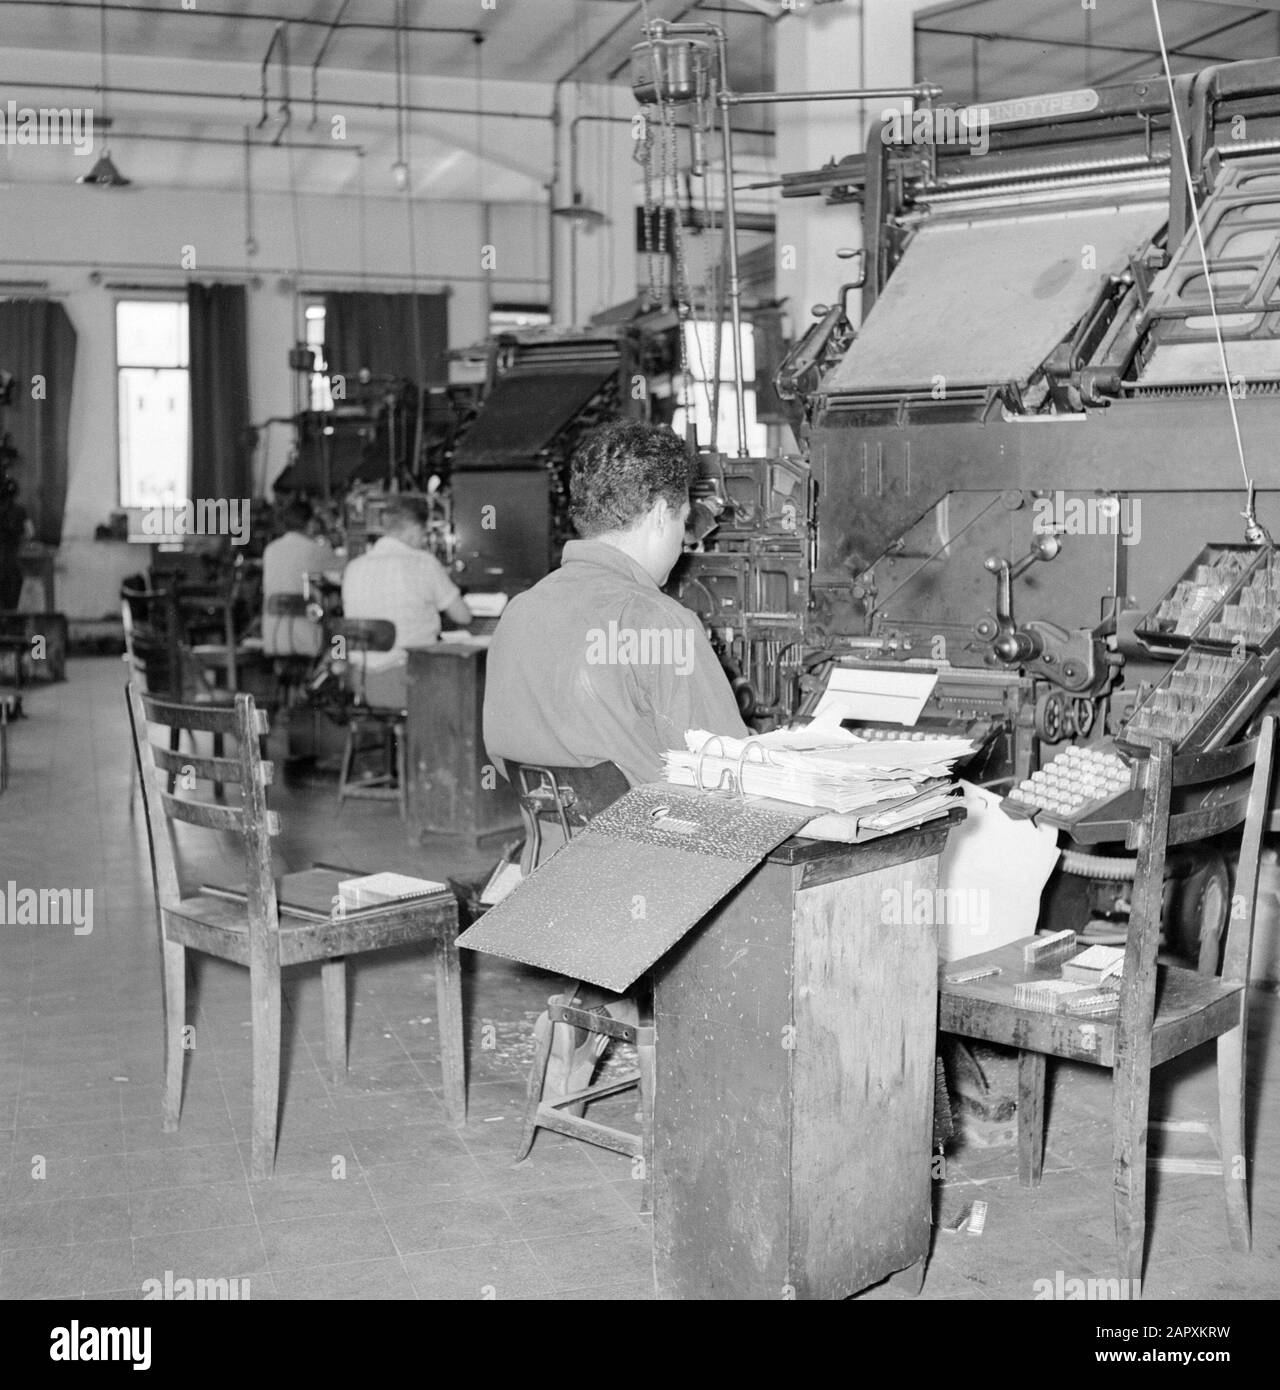 Israel 1964-1965: Tel Aviv, Dawar Printing,  Tel Aviv. Typographers working behind linotype setters in the printing house where the daily Dawar (Dvar) is printed Annotation: The Linotype is a regulating machine in which the functions of moving and casting are united. The machine was developed by a German immigrant in the US and produced from 1886 Date: 1964 Location: Israel, Tel Aviv Keywords: workers, printing, newspapers, machines, typographers, workshops Stock Photo